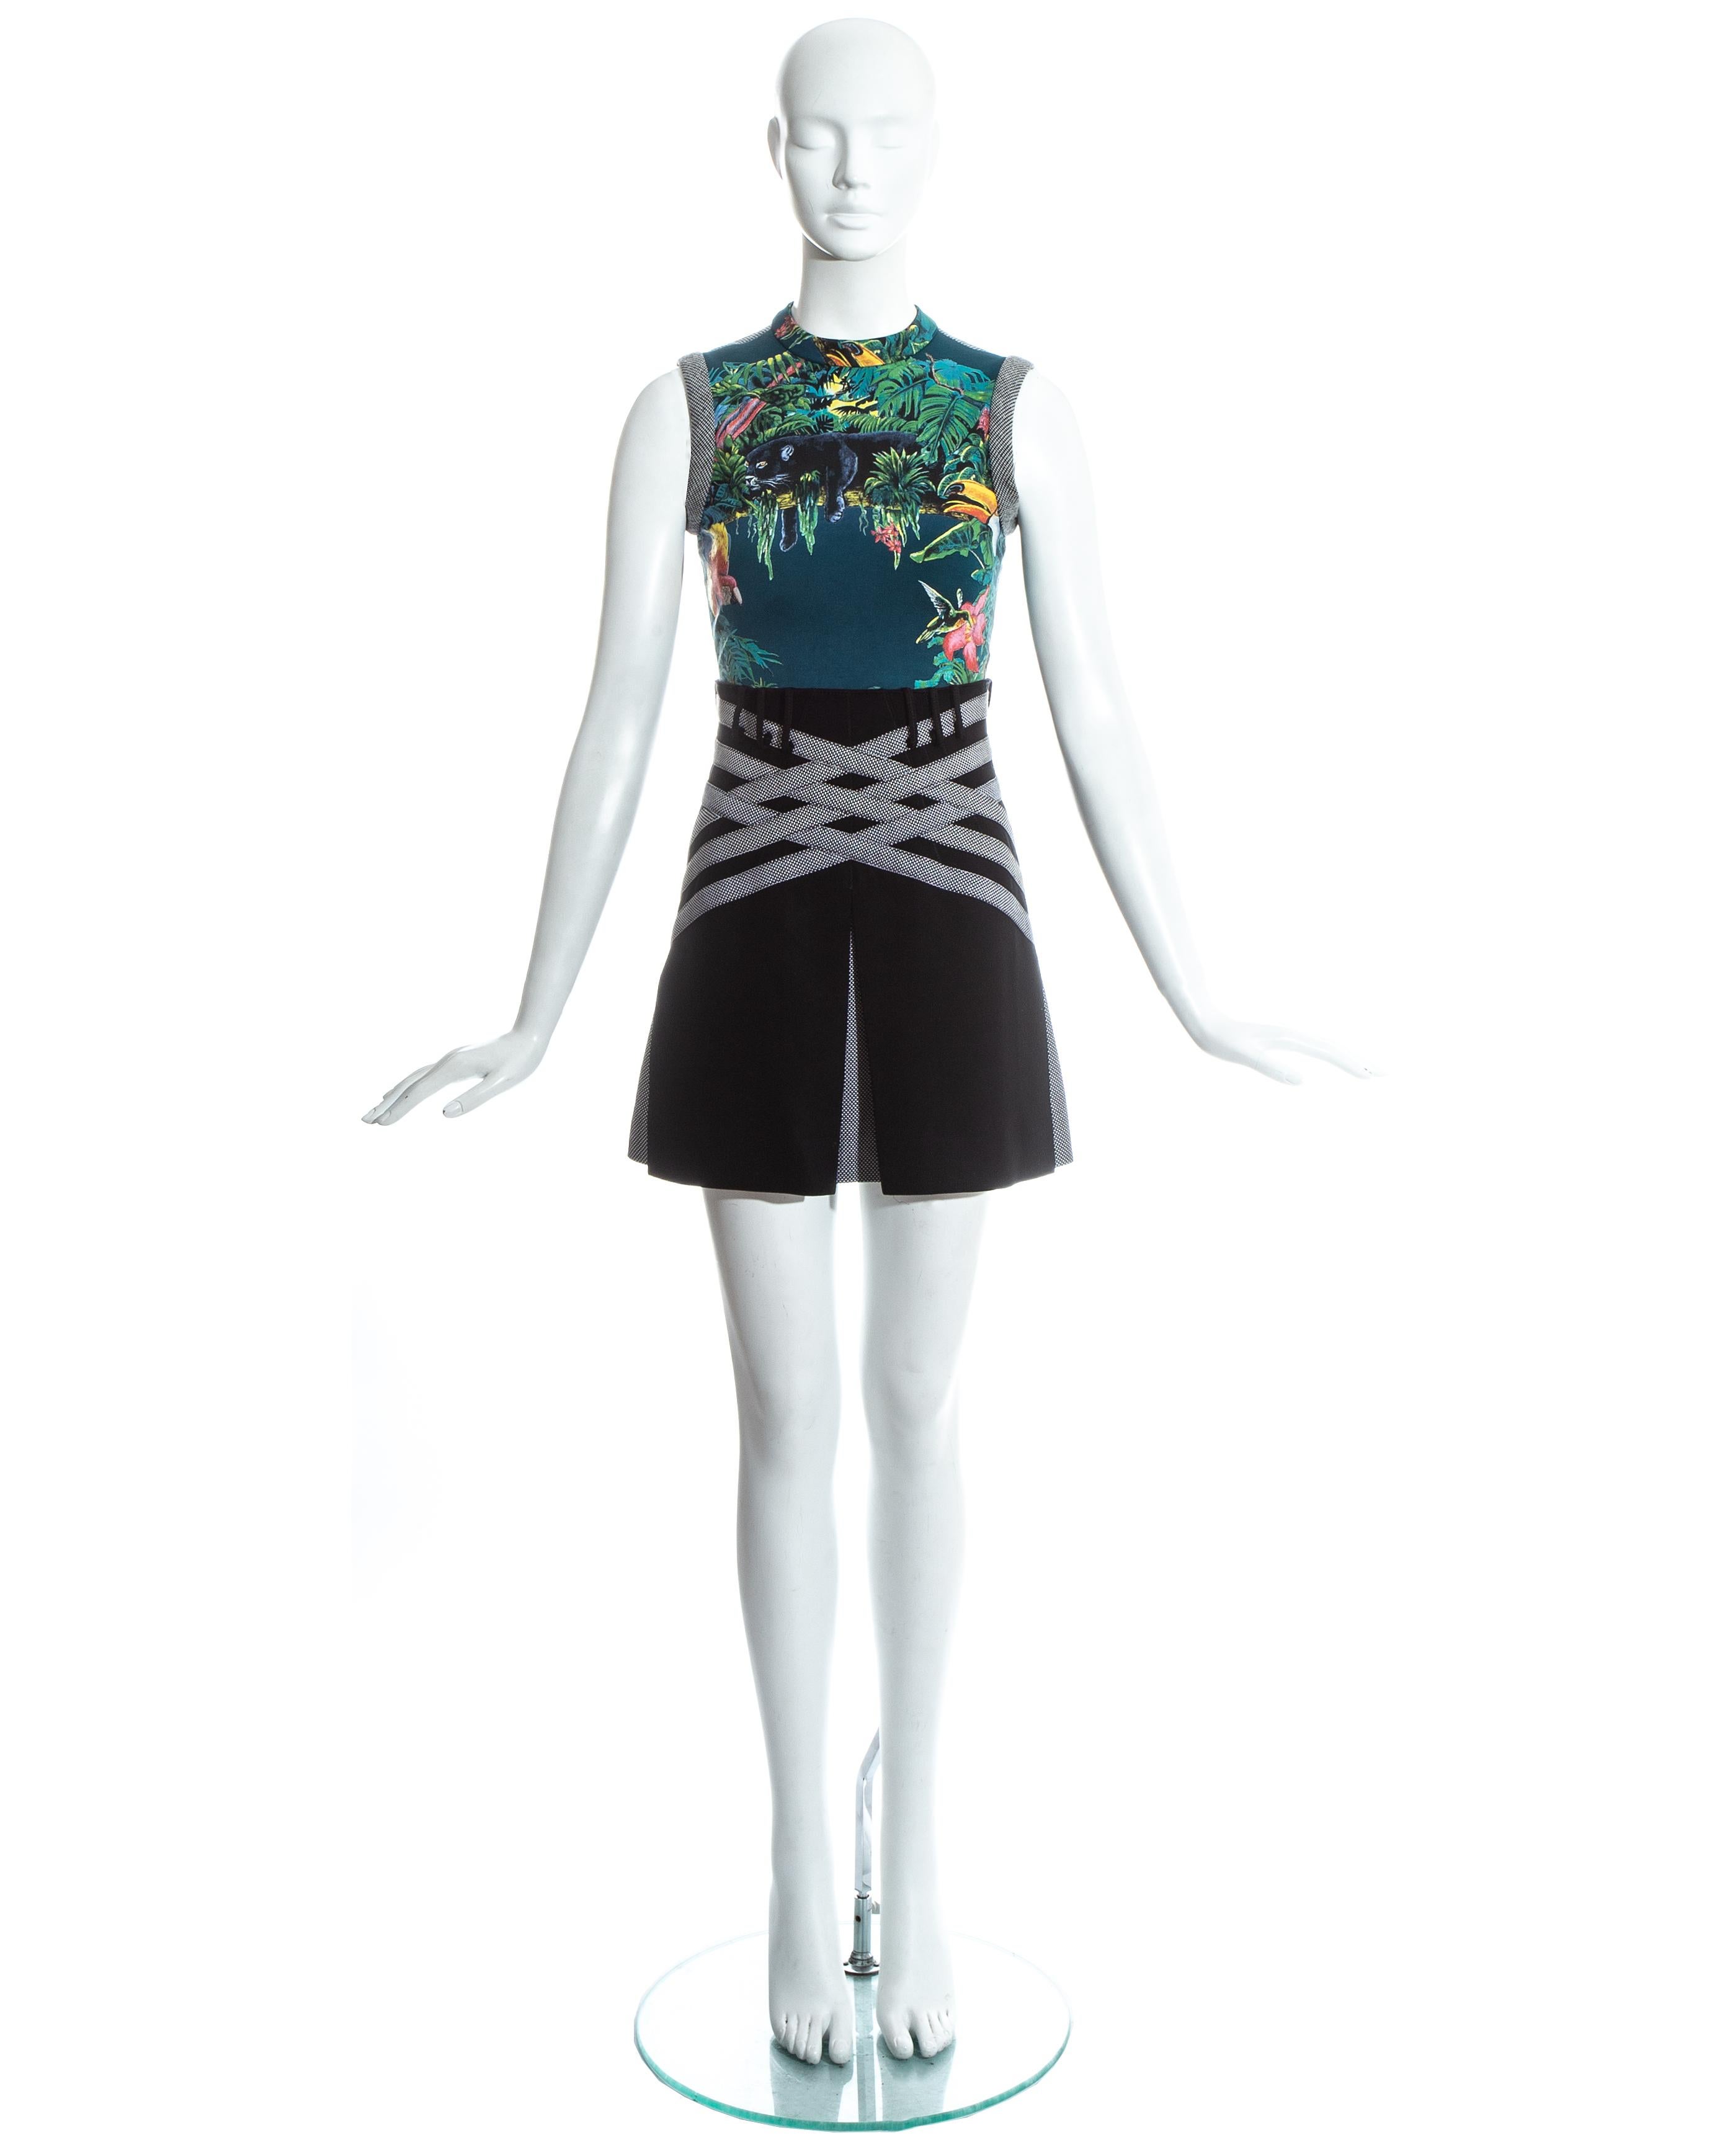 Balenciaga by Nicolas Ghesquière; teal fitted vest with jungle themed print and back zip fastening. Black high waisted mini skirt with box pleats and checked pattern . Worn together as an ensemble and seperately on the runway.   

Spring-Summer 2003